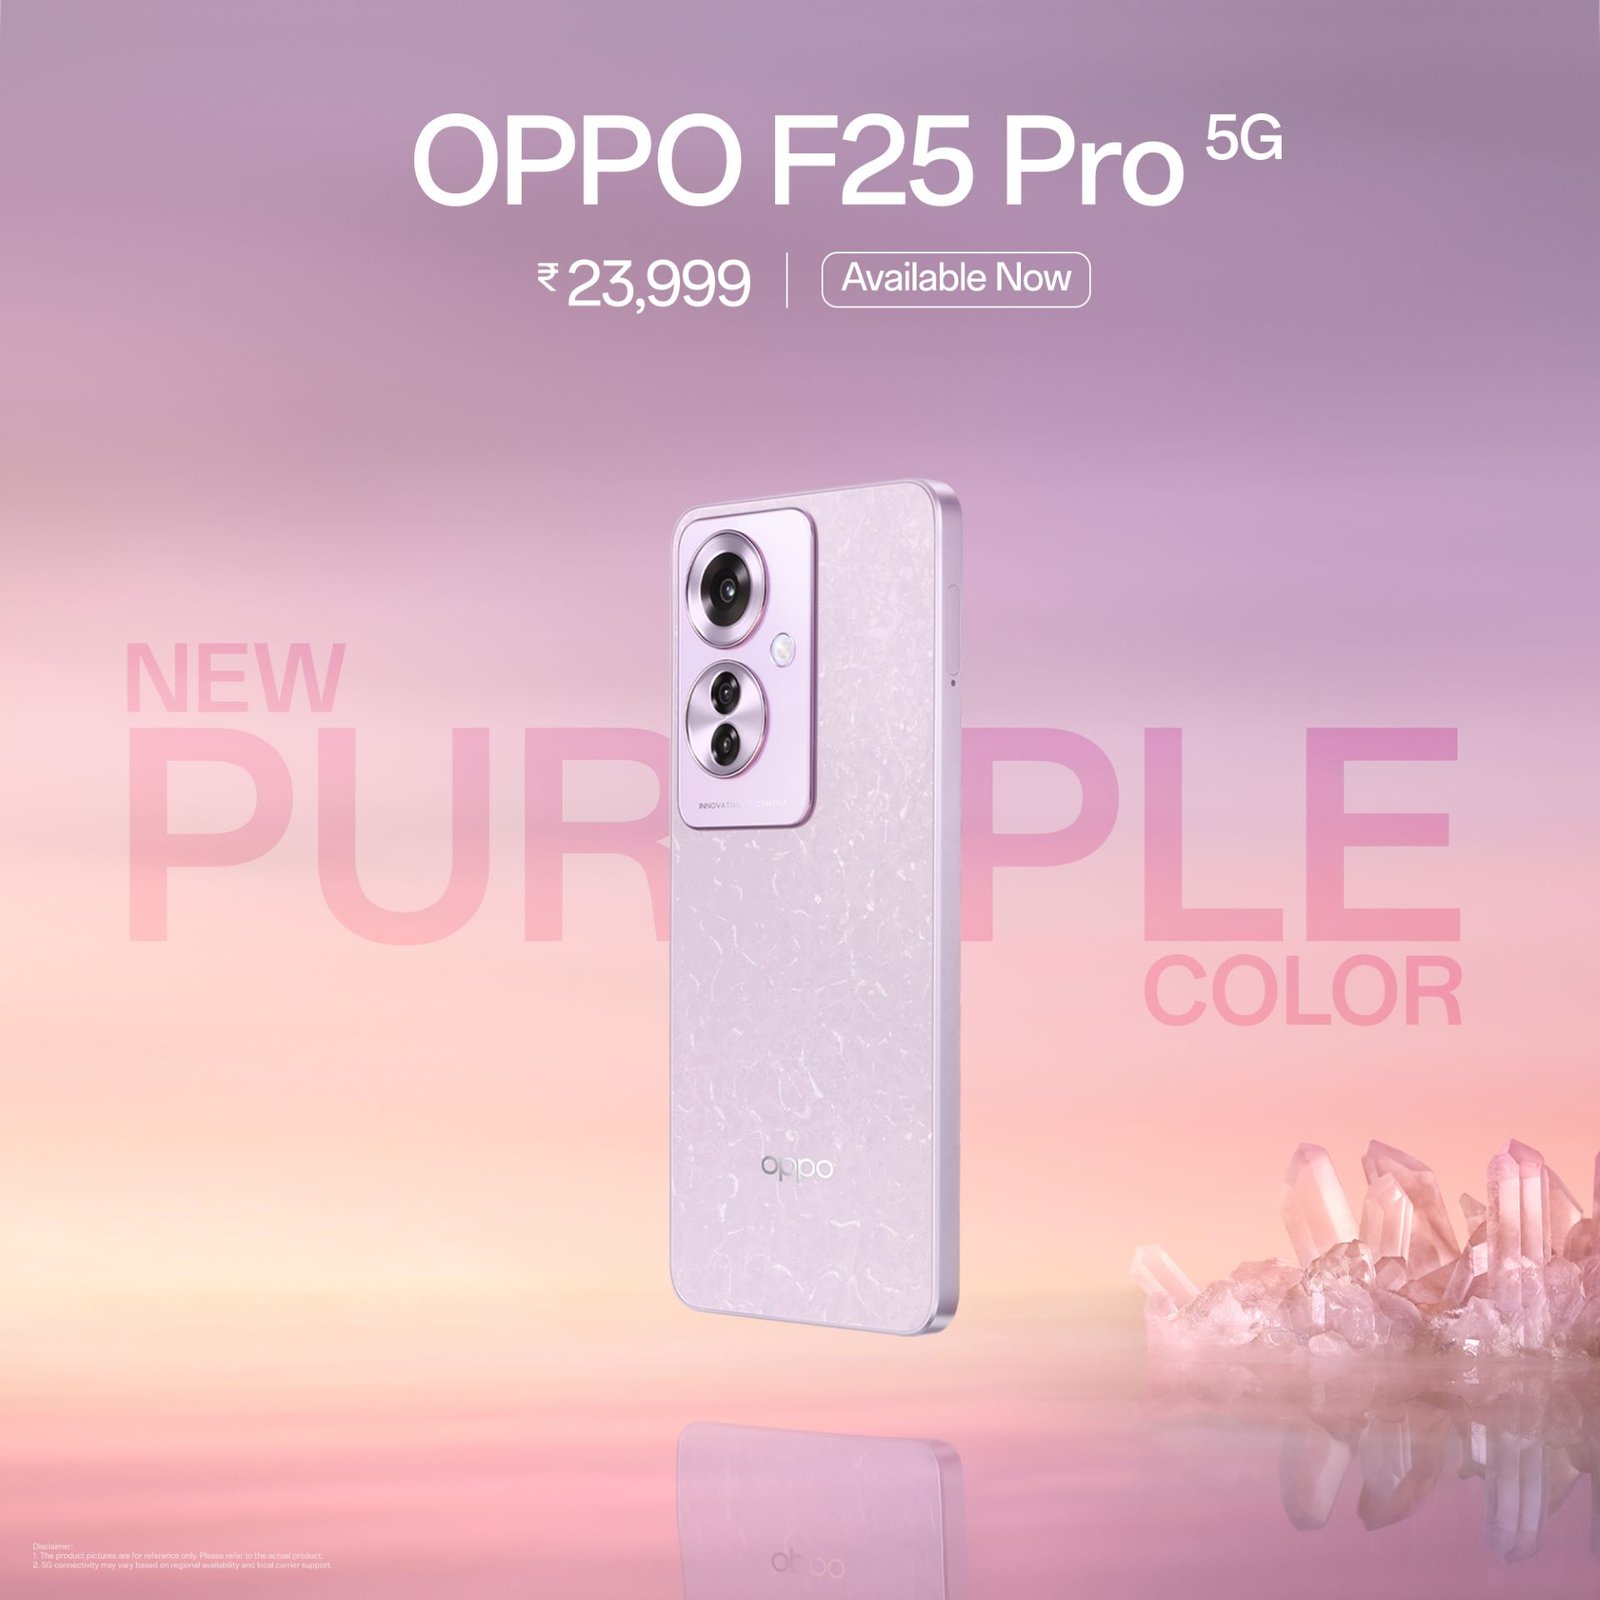 OPPO F25 Pro 5G Launches New Coral Purple Variant